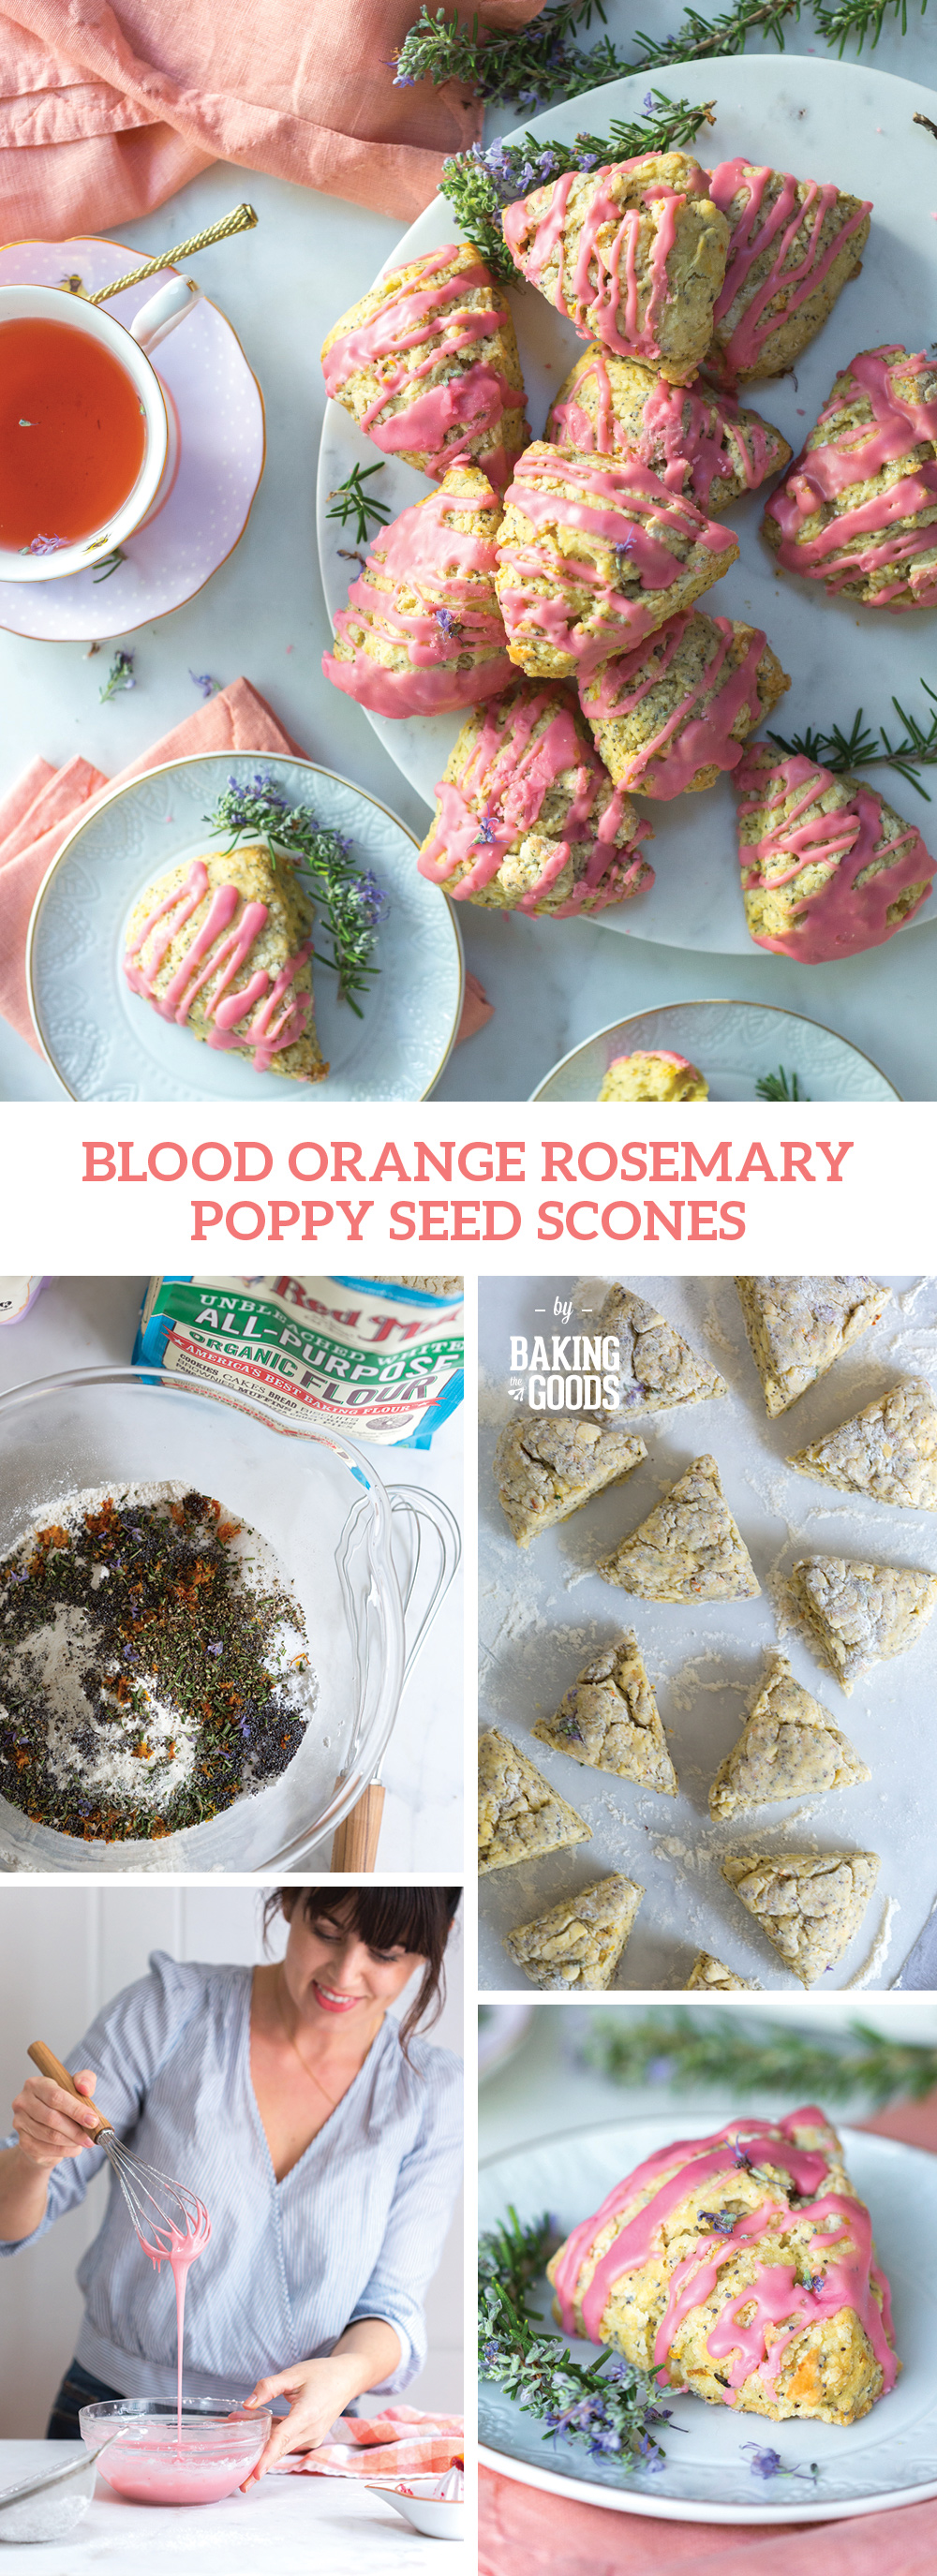 Blood Orange Rosemary Poppy Seed Scones by Baking The Goods